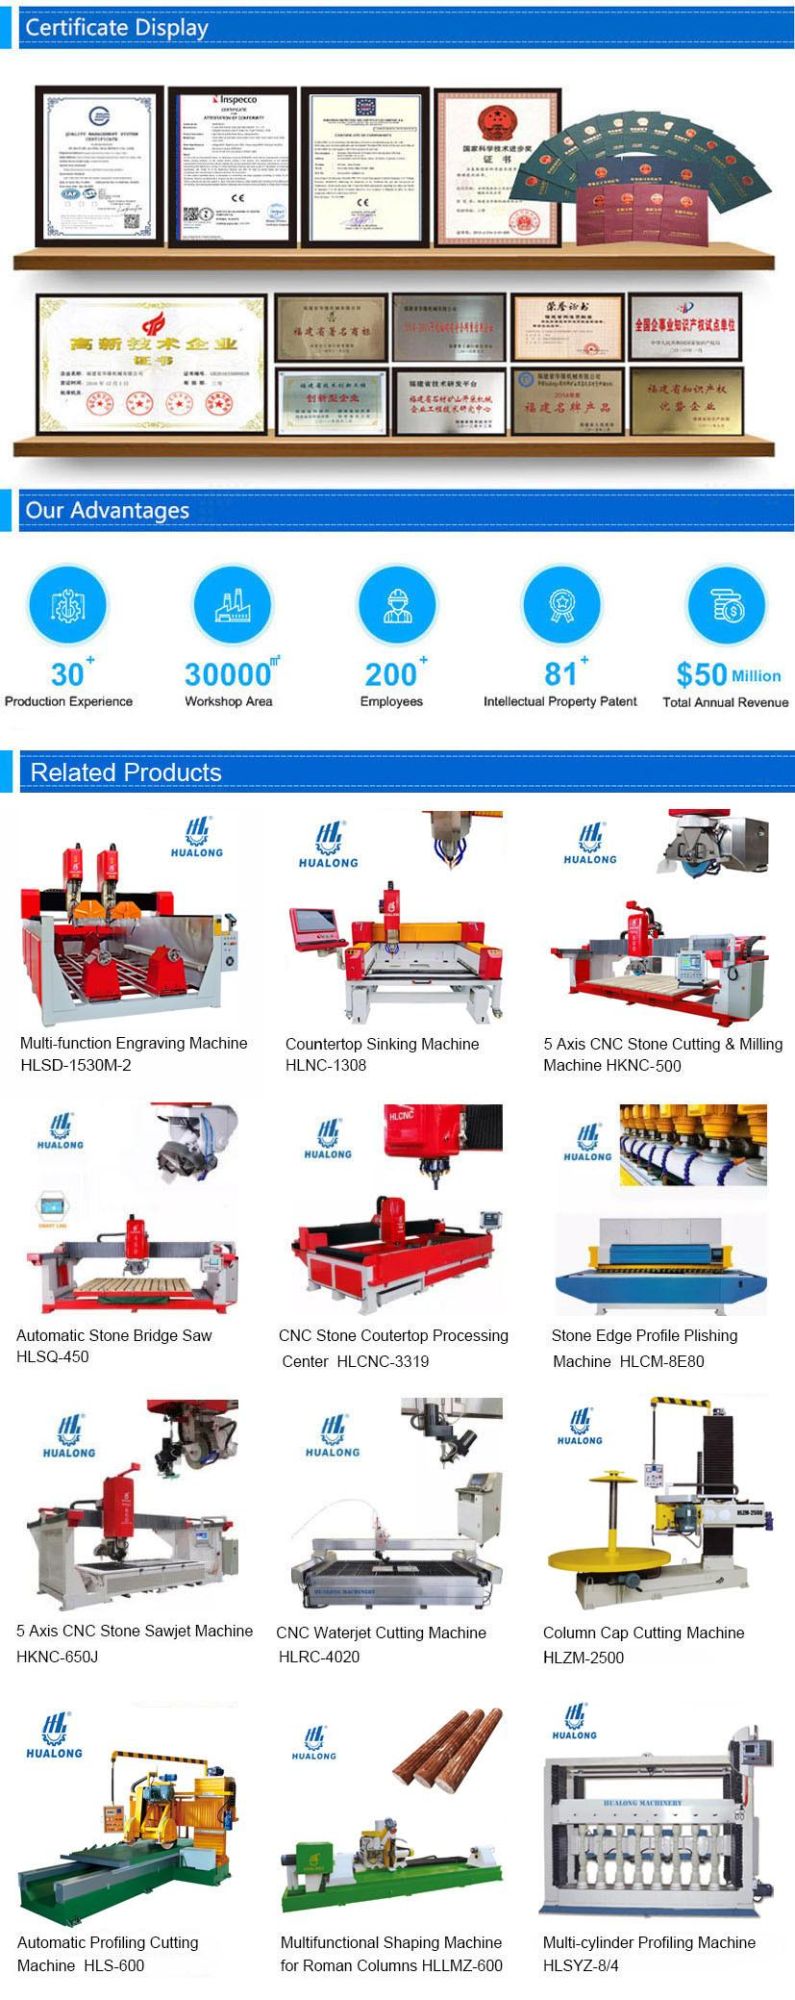 Hualong Stone Machinery High Efficiency CNC Engraver Hlsd-2030-2 Glass Lettering Granite Marble Stone Router Engraving Milling Carving Machine with Double Heads